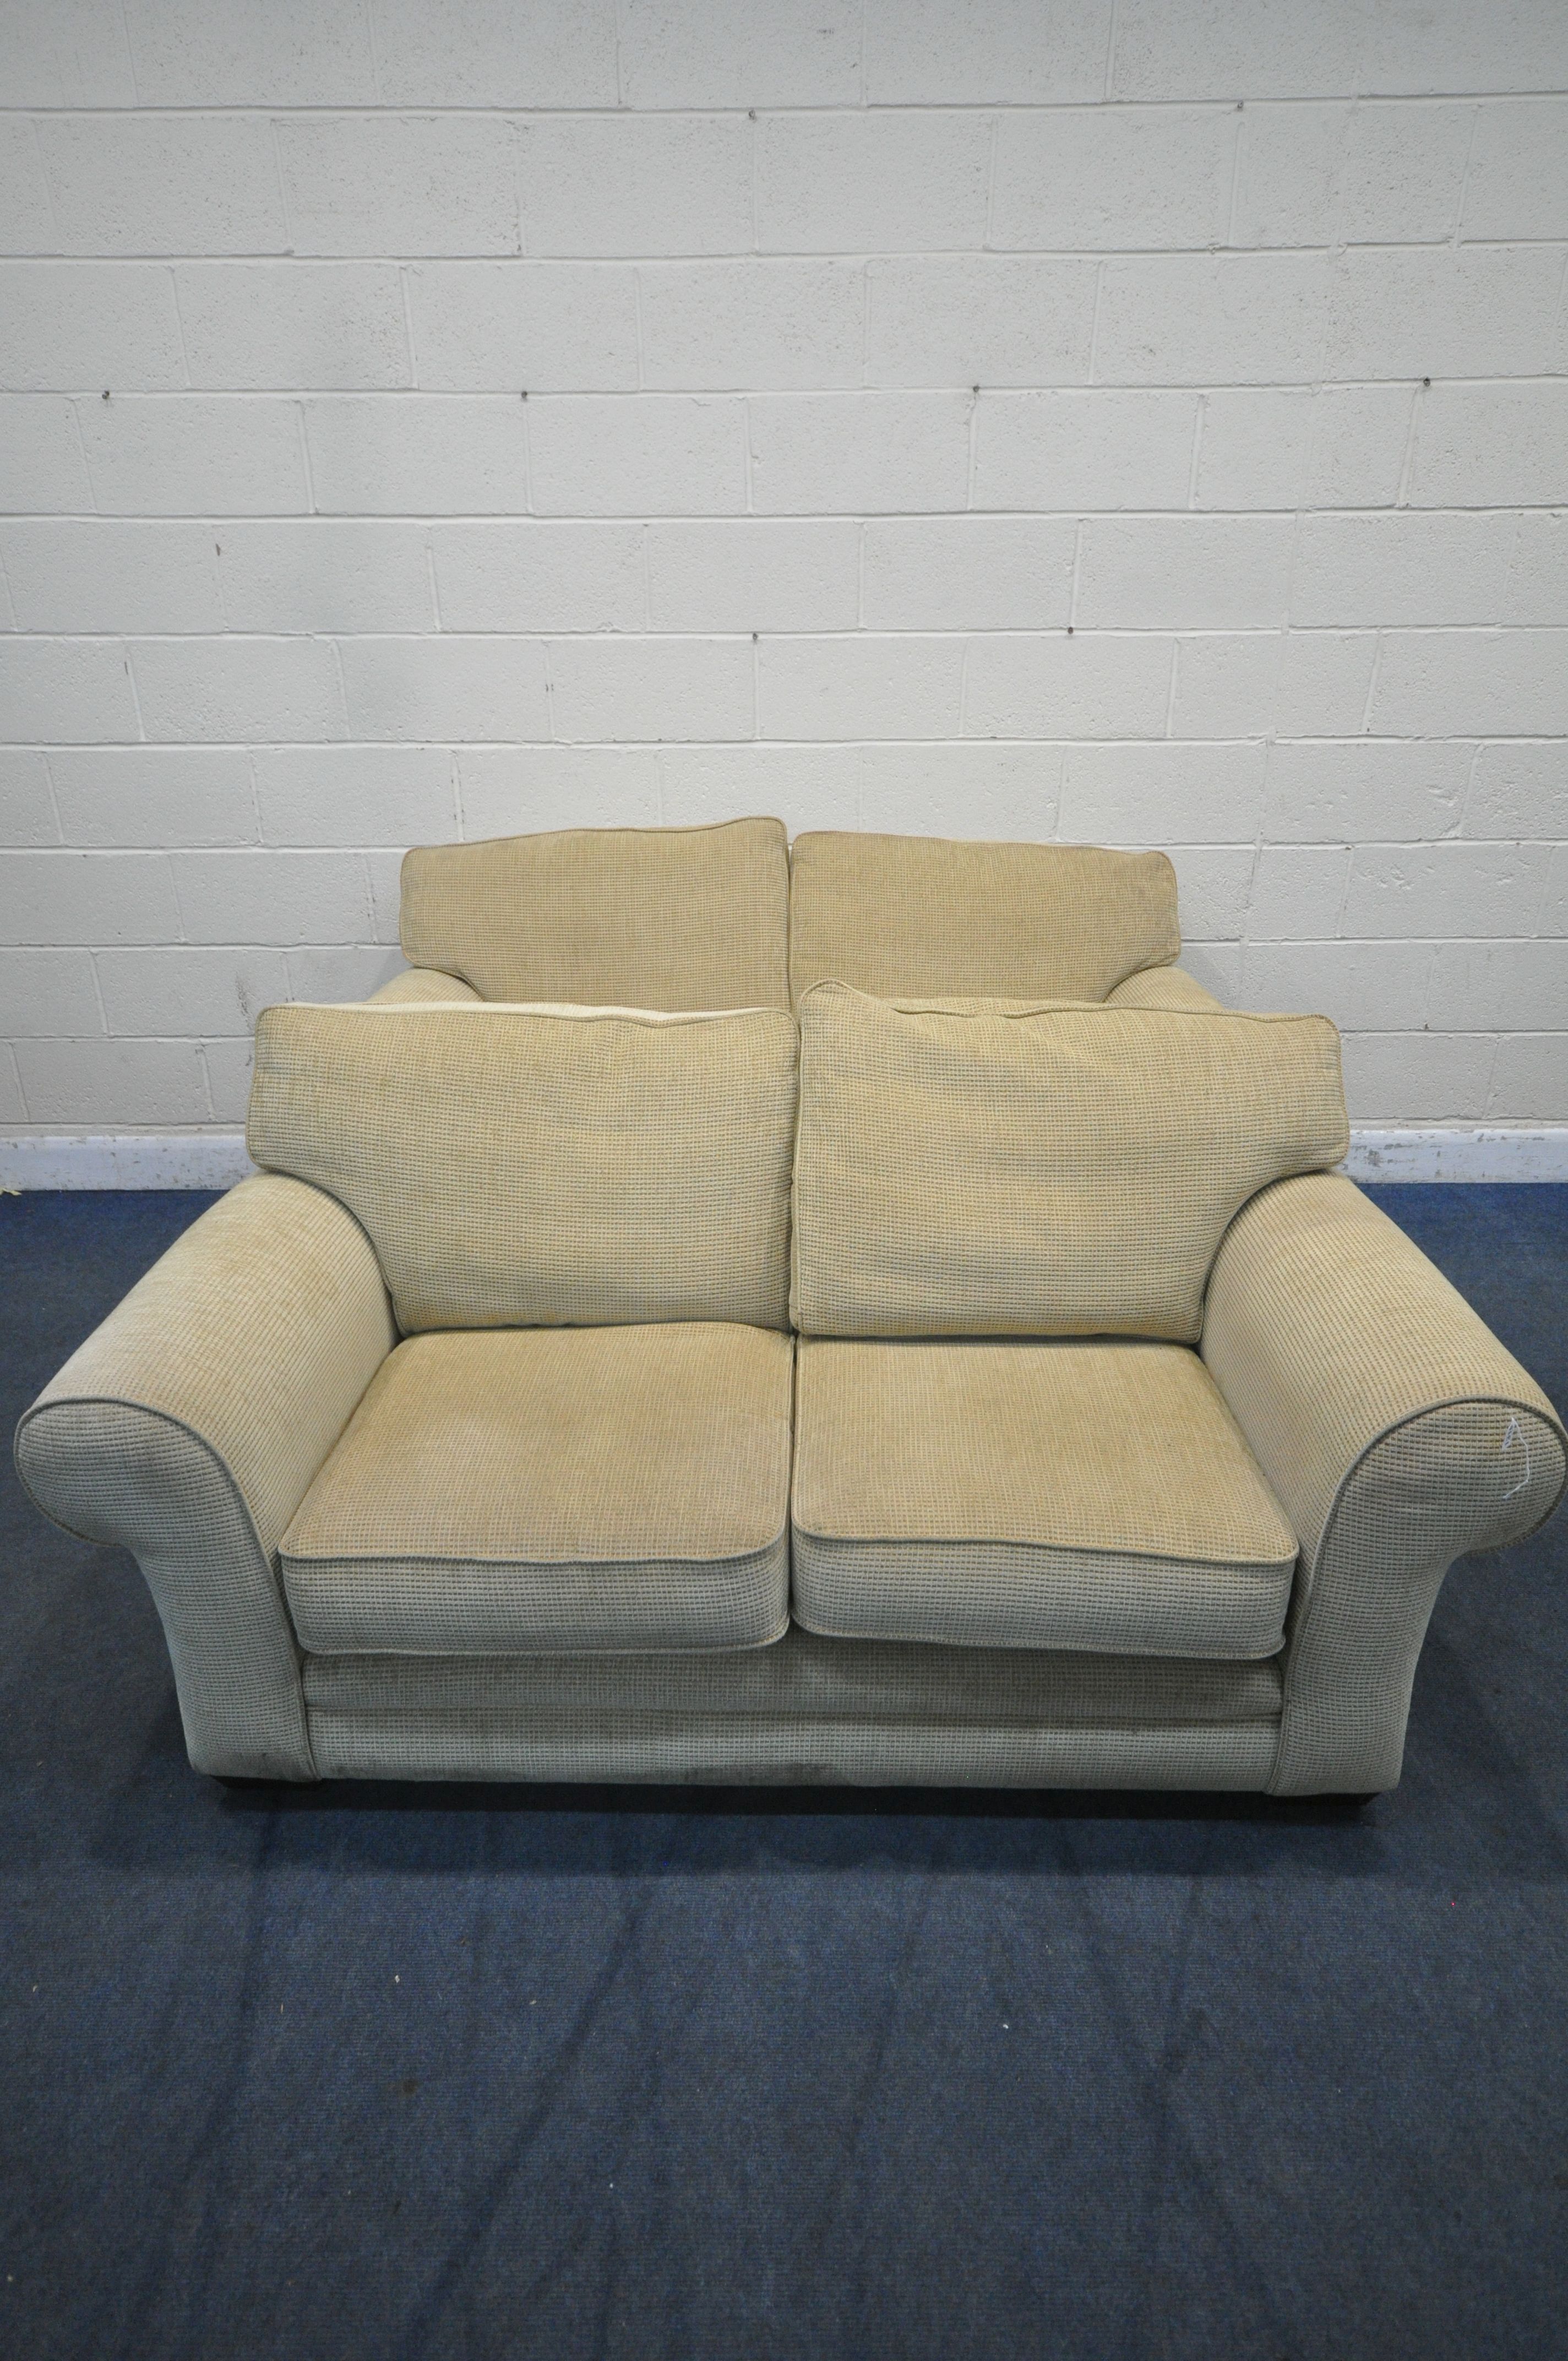 A PAIR OF BEIGE UPHOLSTERED TWO SEATER SOFAS, length 180cm x depth 94cm x height 84cm (condition